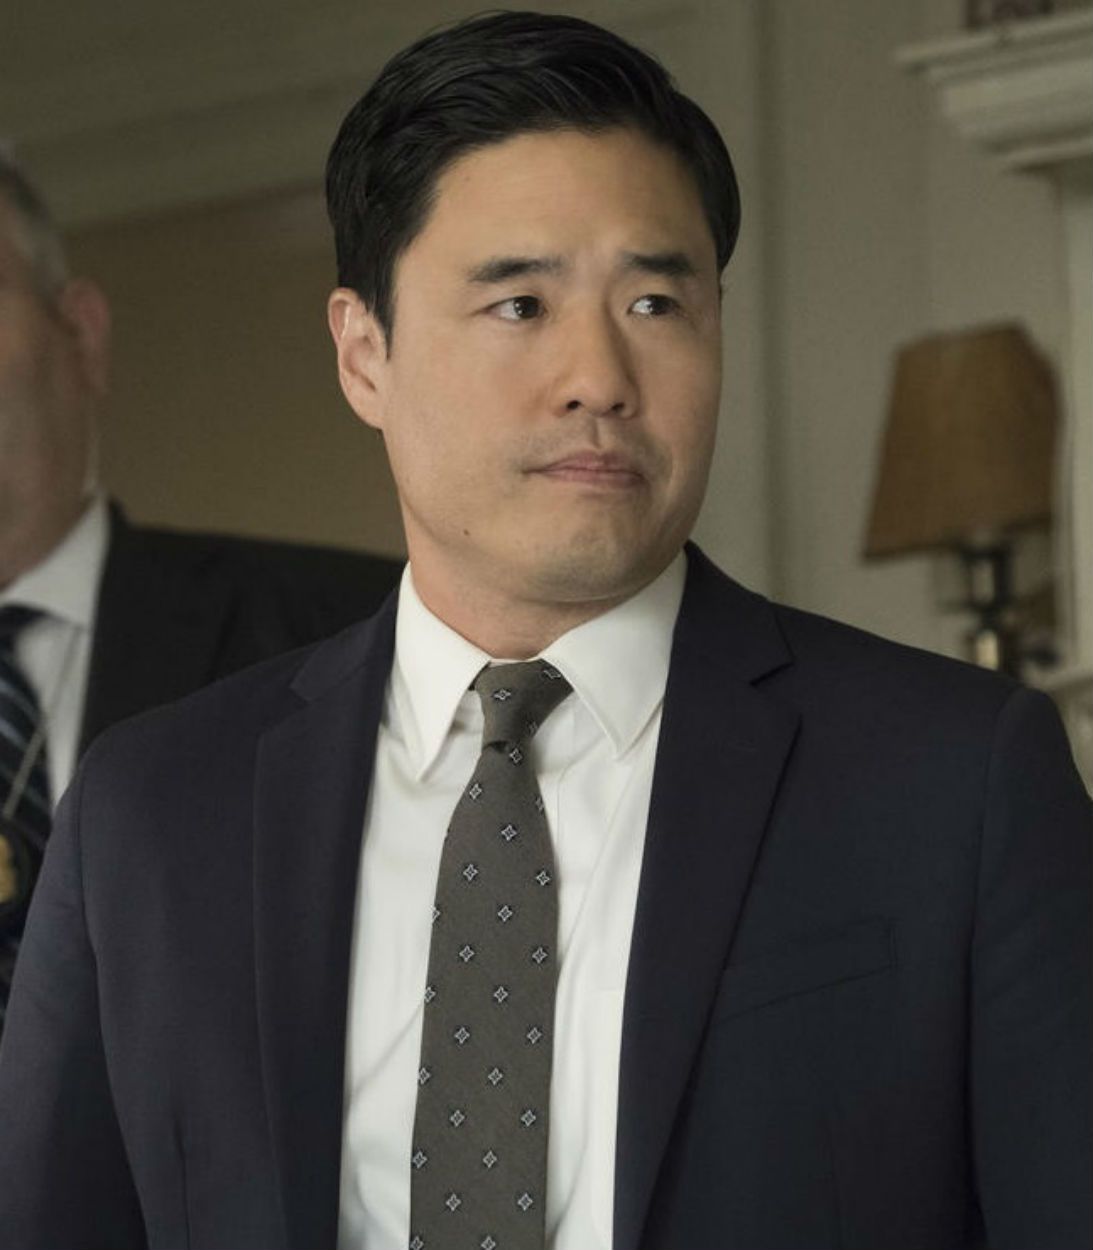 Randall Park as Jimmy Woo in Ant-Man and the Wasp Vertical